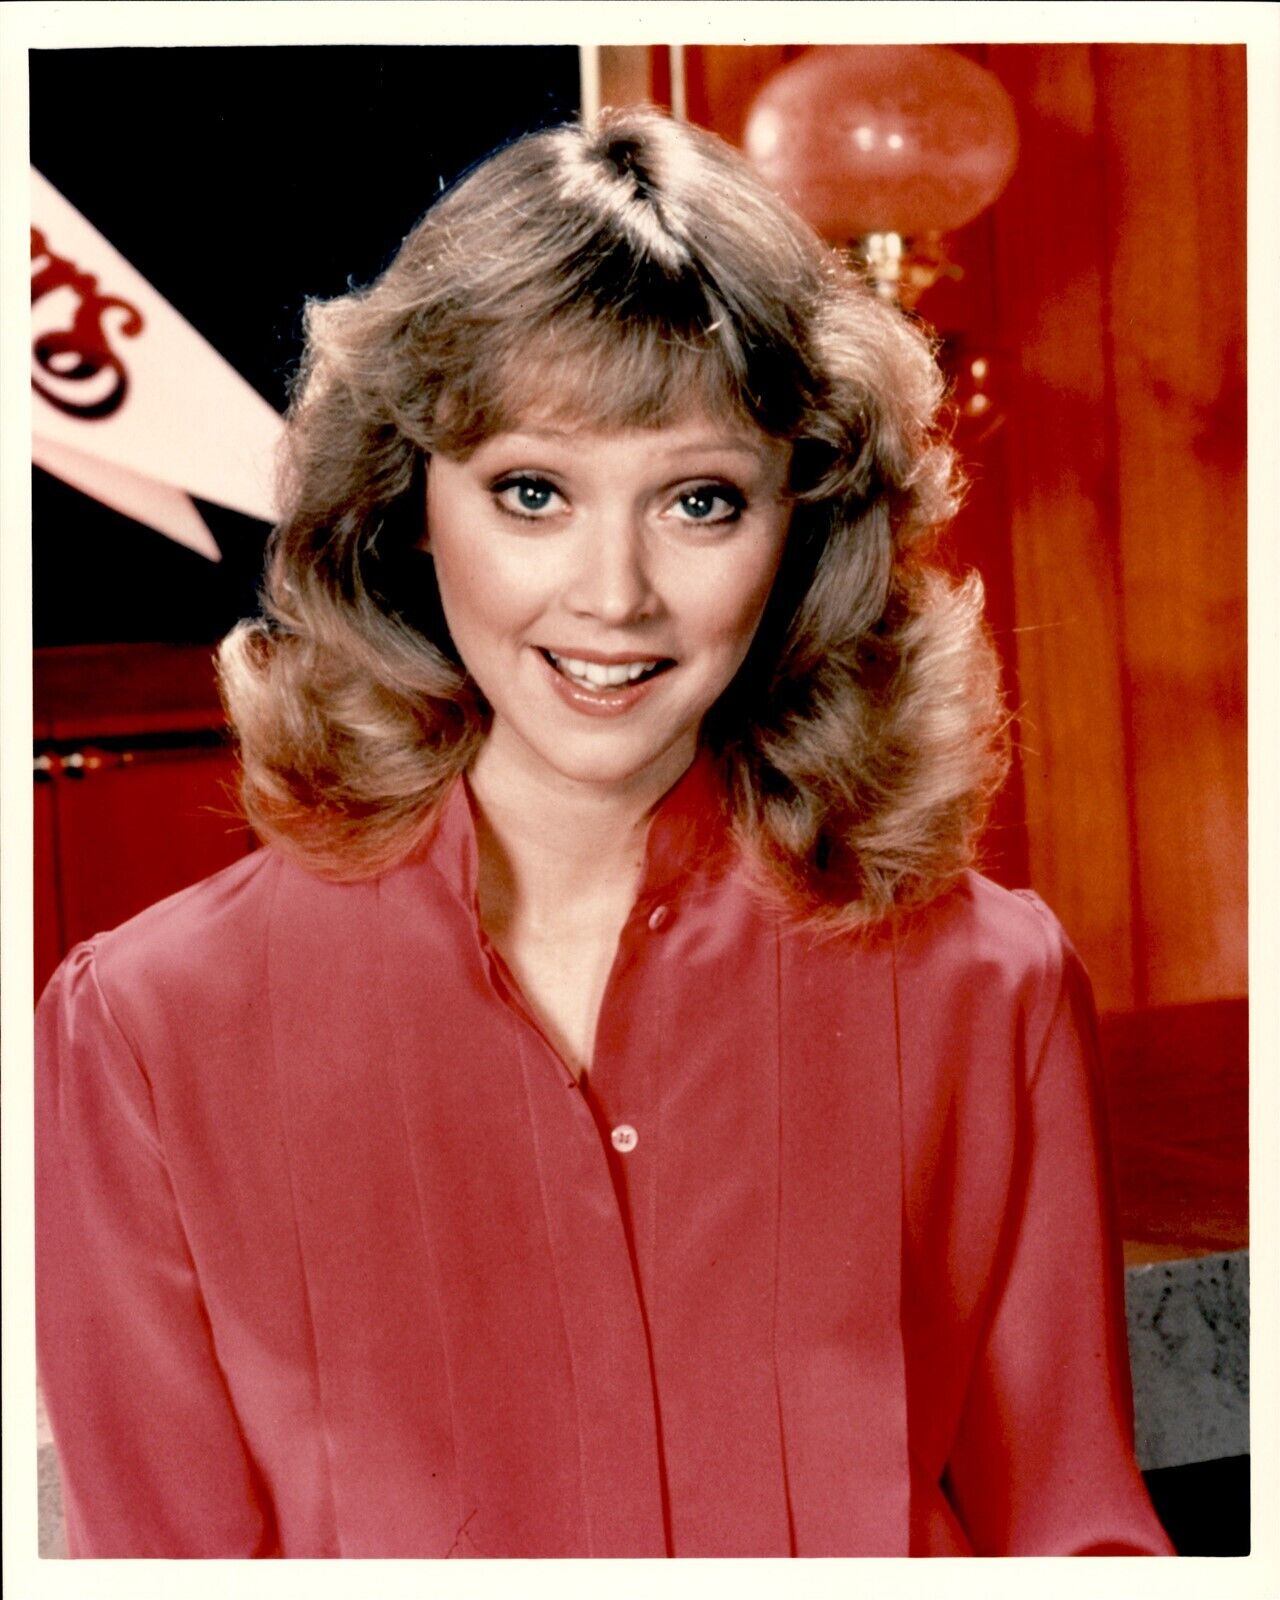 BR13 Rare TV Vtg Color Photo SHELLEY LONG Cheers Diane Chambers Pretty Actress